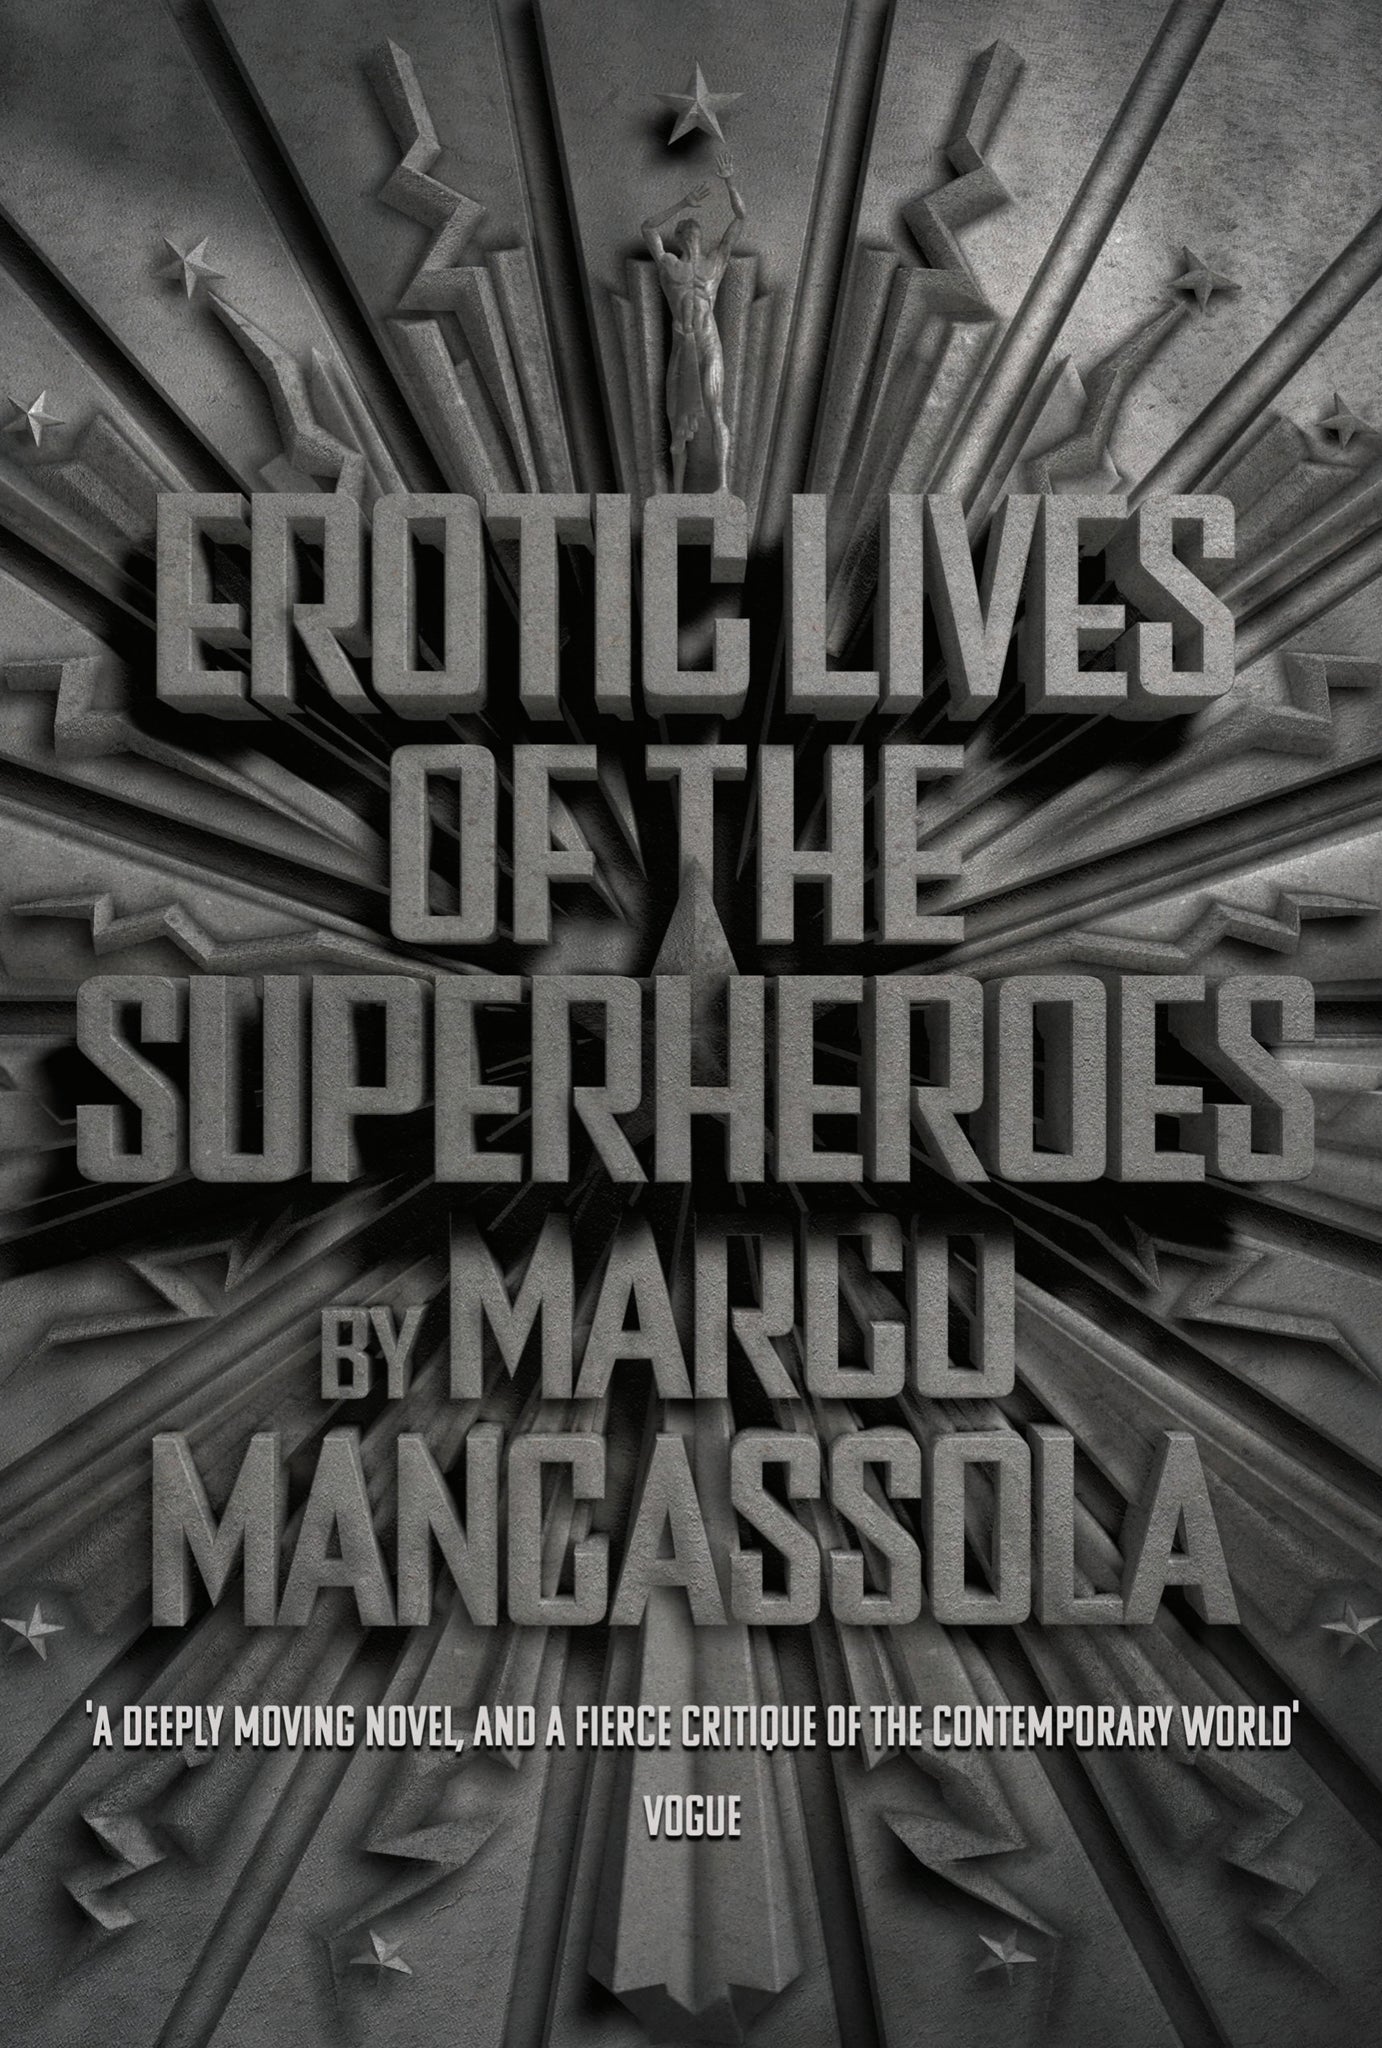 Erotic Lives of The Superheroes by Marco Mancassola